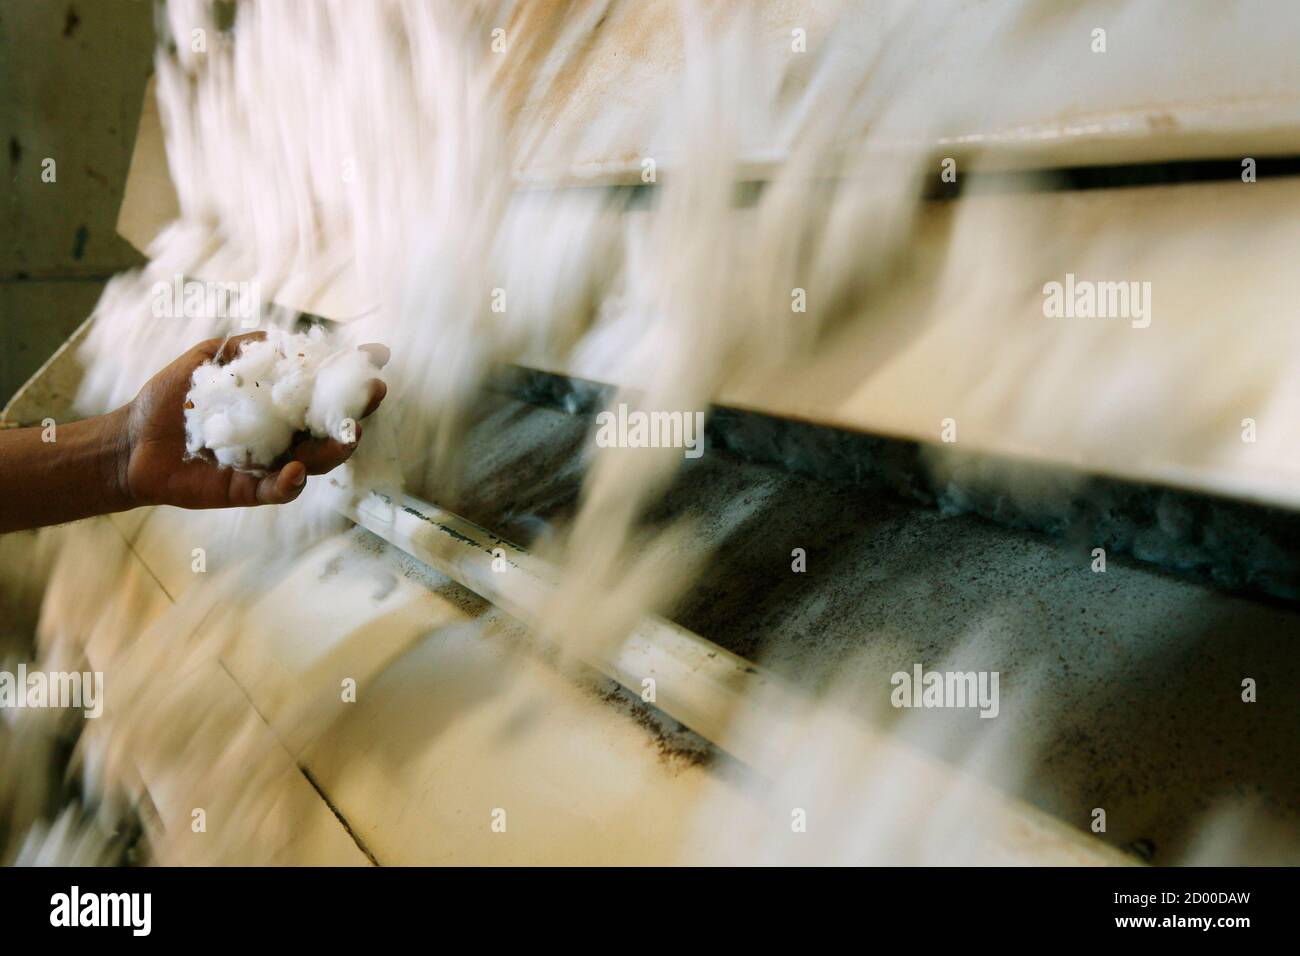 Agriculture - A farmers hand holds cotton squares and blossoms on a mid  growth cotton plant / Louisiana, USA Stock Photo - Alamy